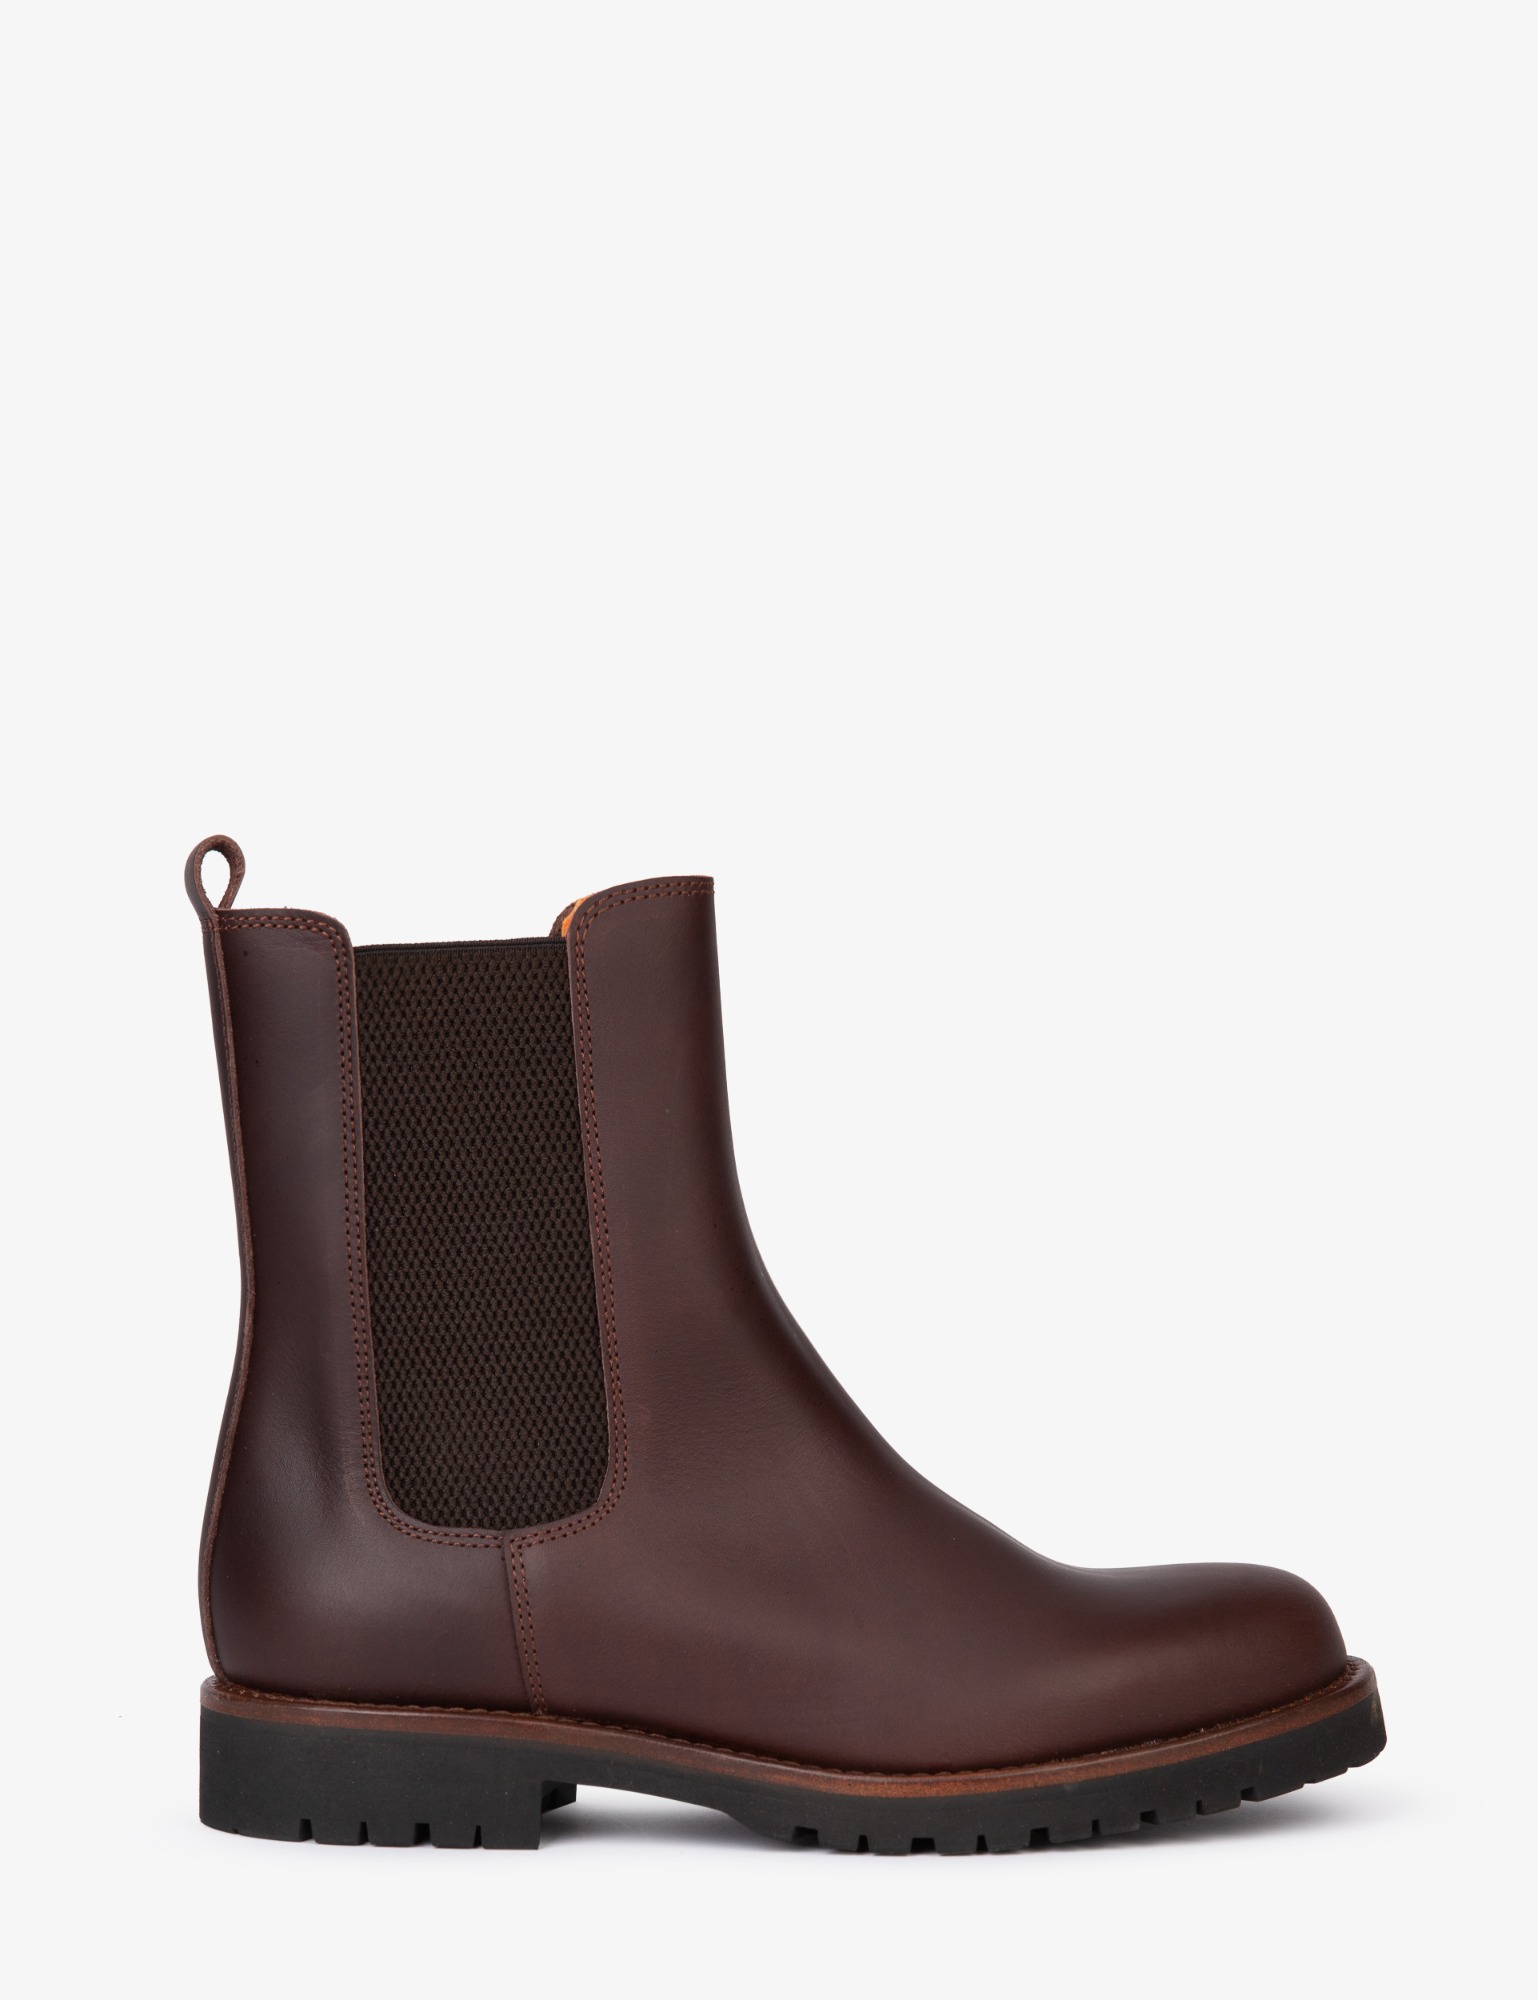 Doma Leather Boot